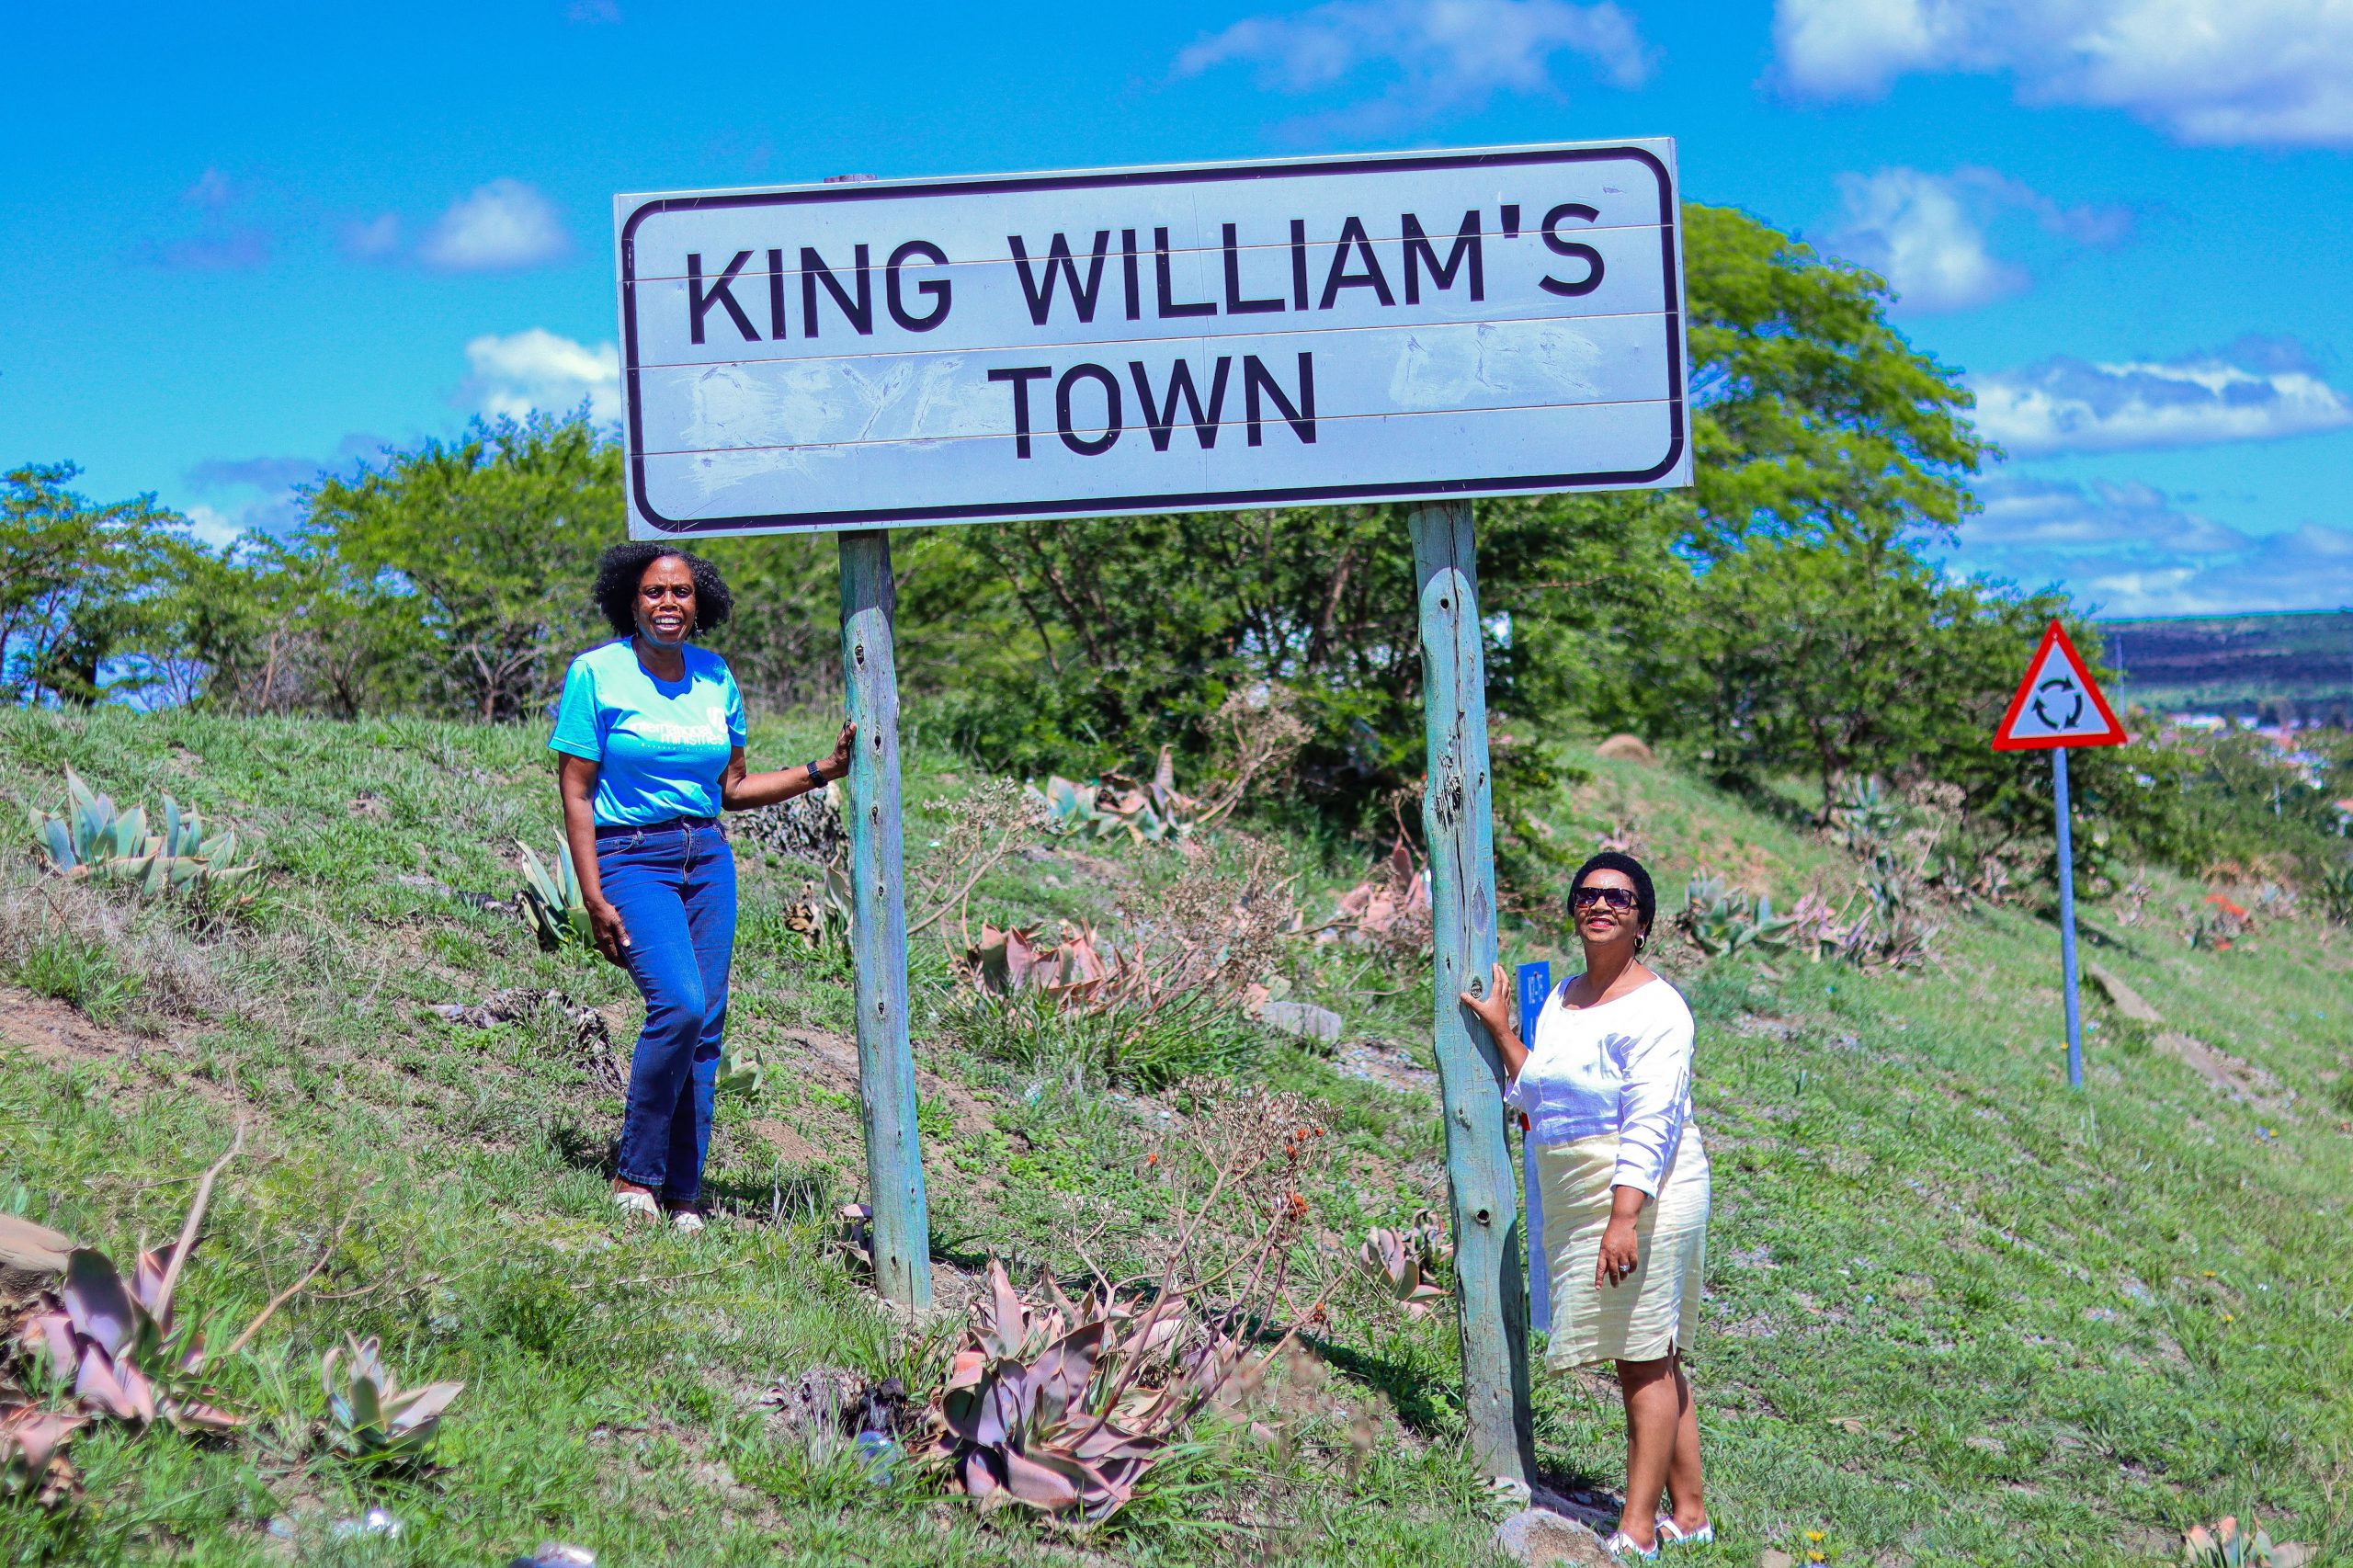 KIng William's Town Sign